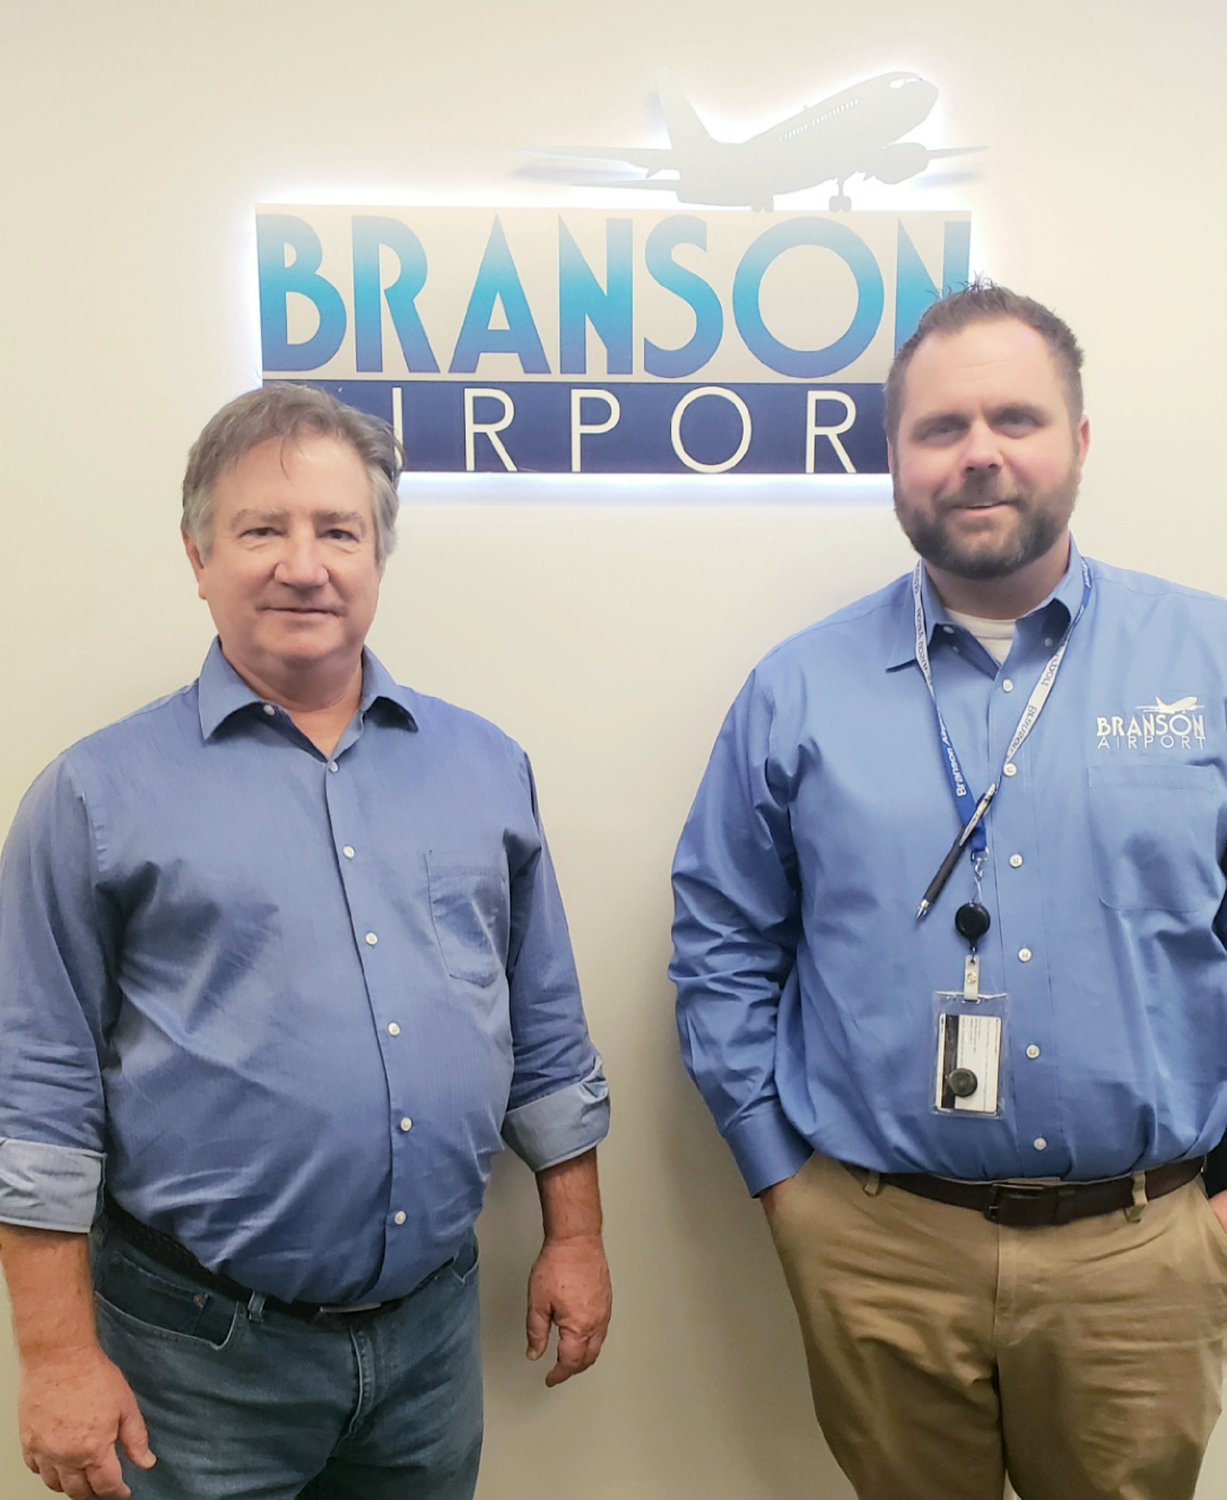 The new leadership team at Branson Airport comprises, from left, Stan Field as executive director and Jesse Fosnaugh as deputy director.